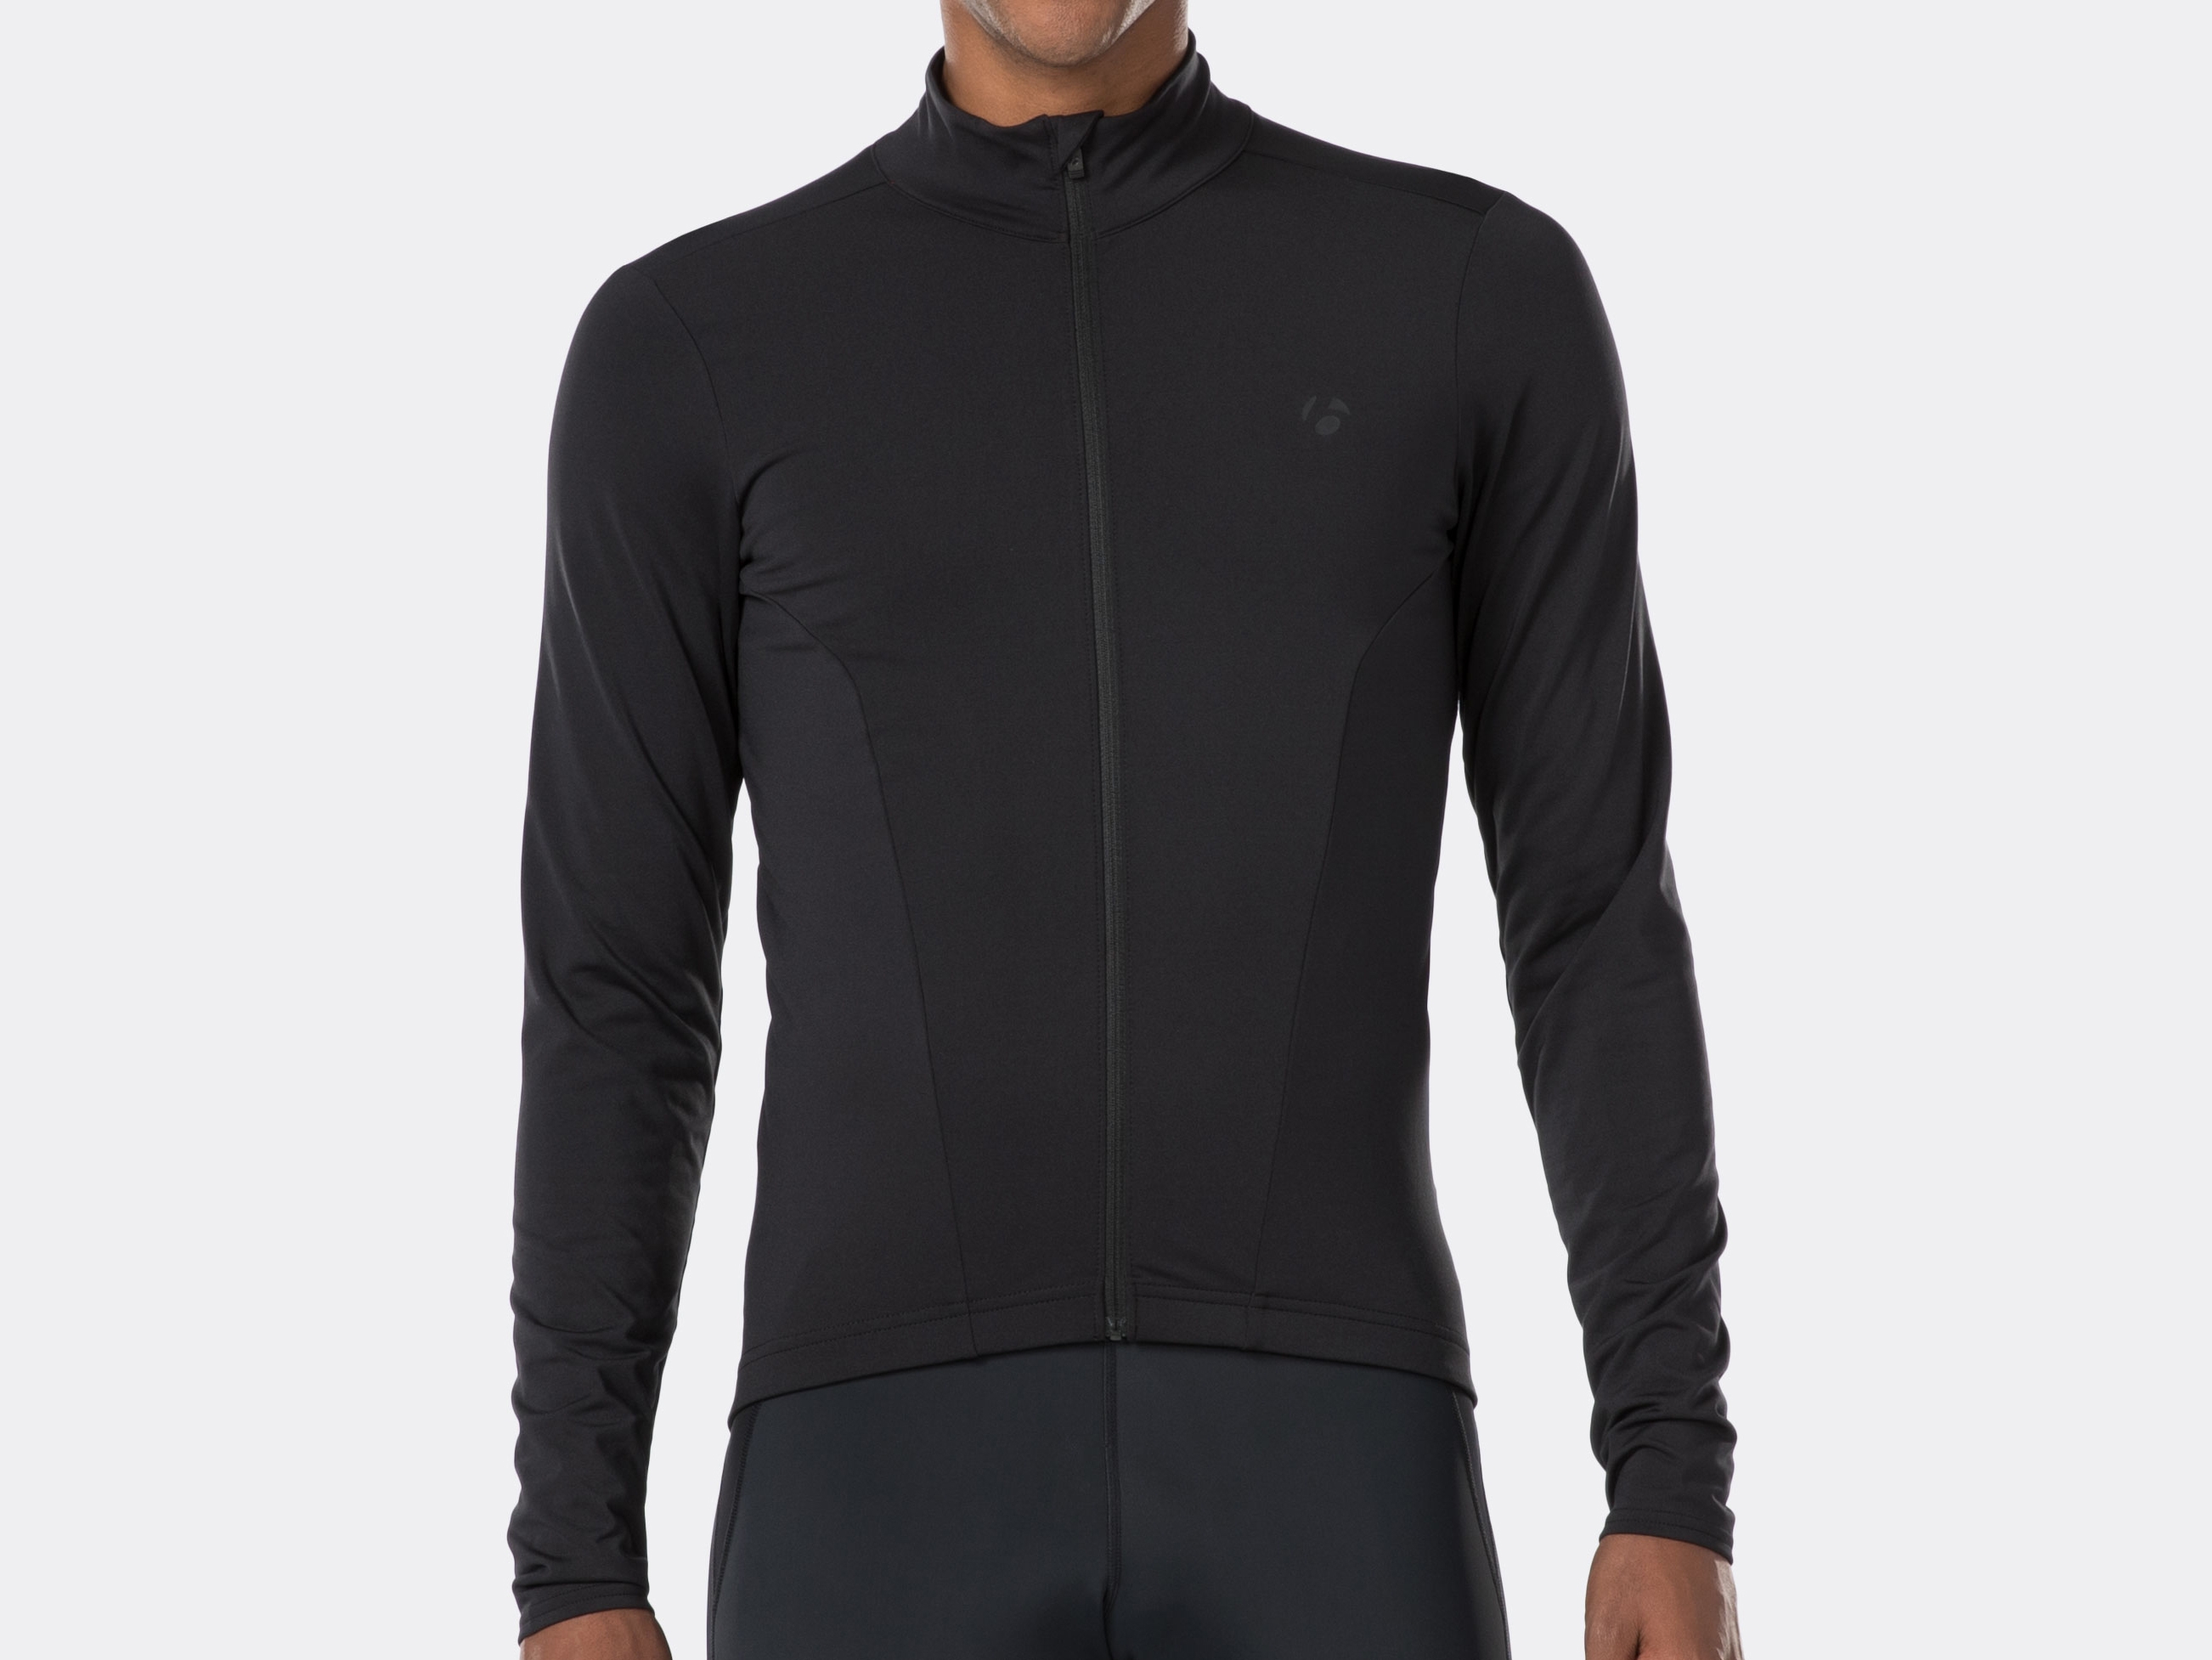 Bontrager Velocis Long-Sleeve Thermal 